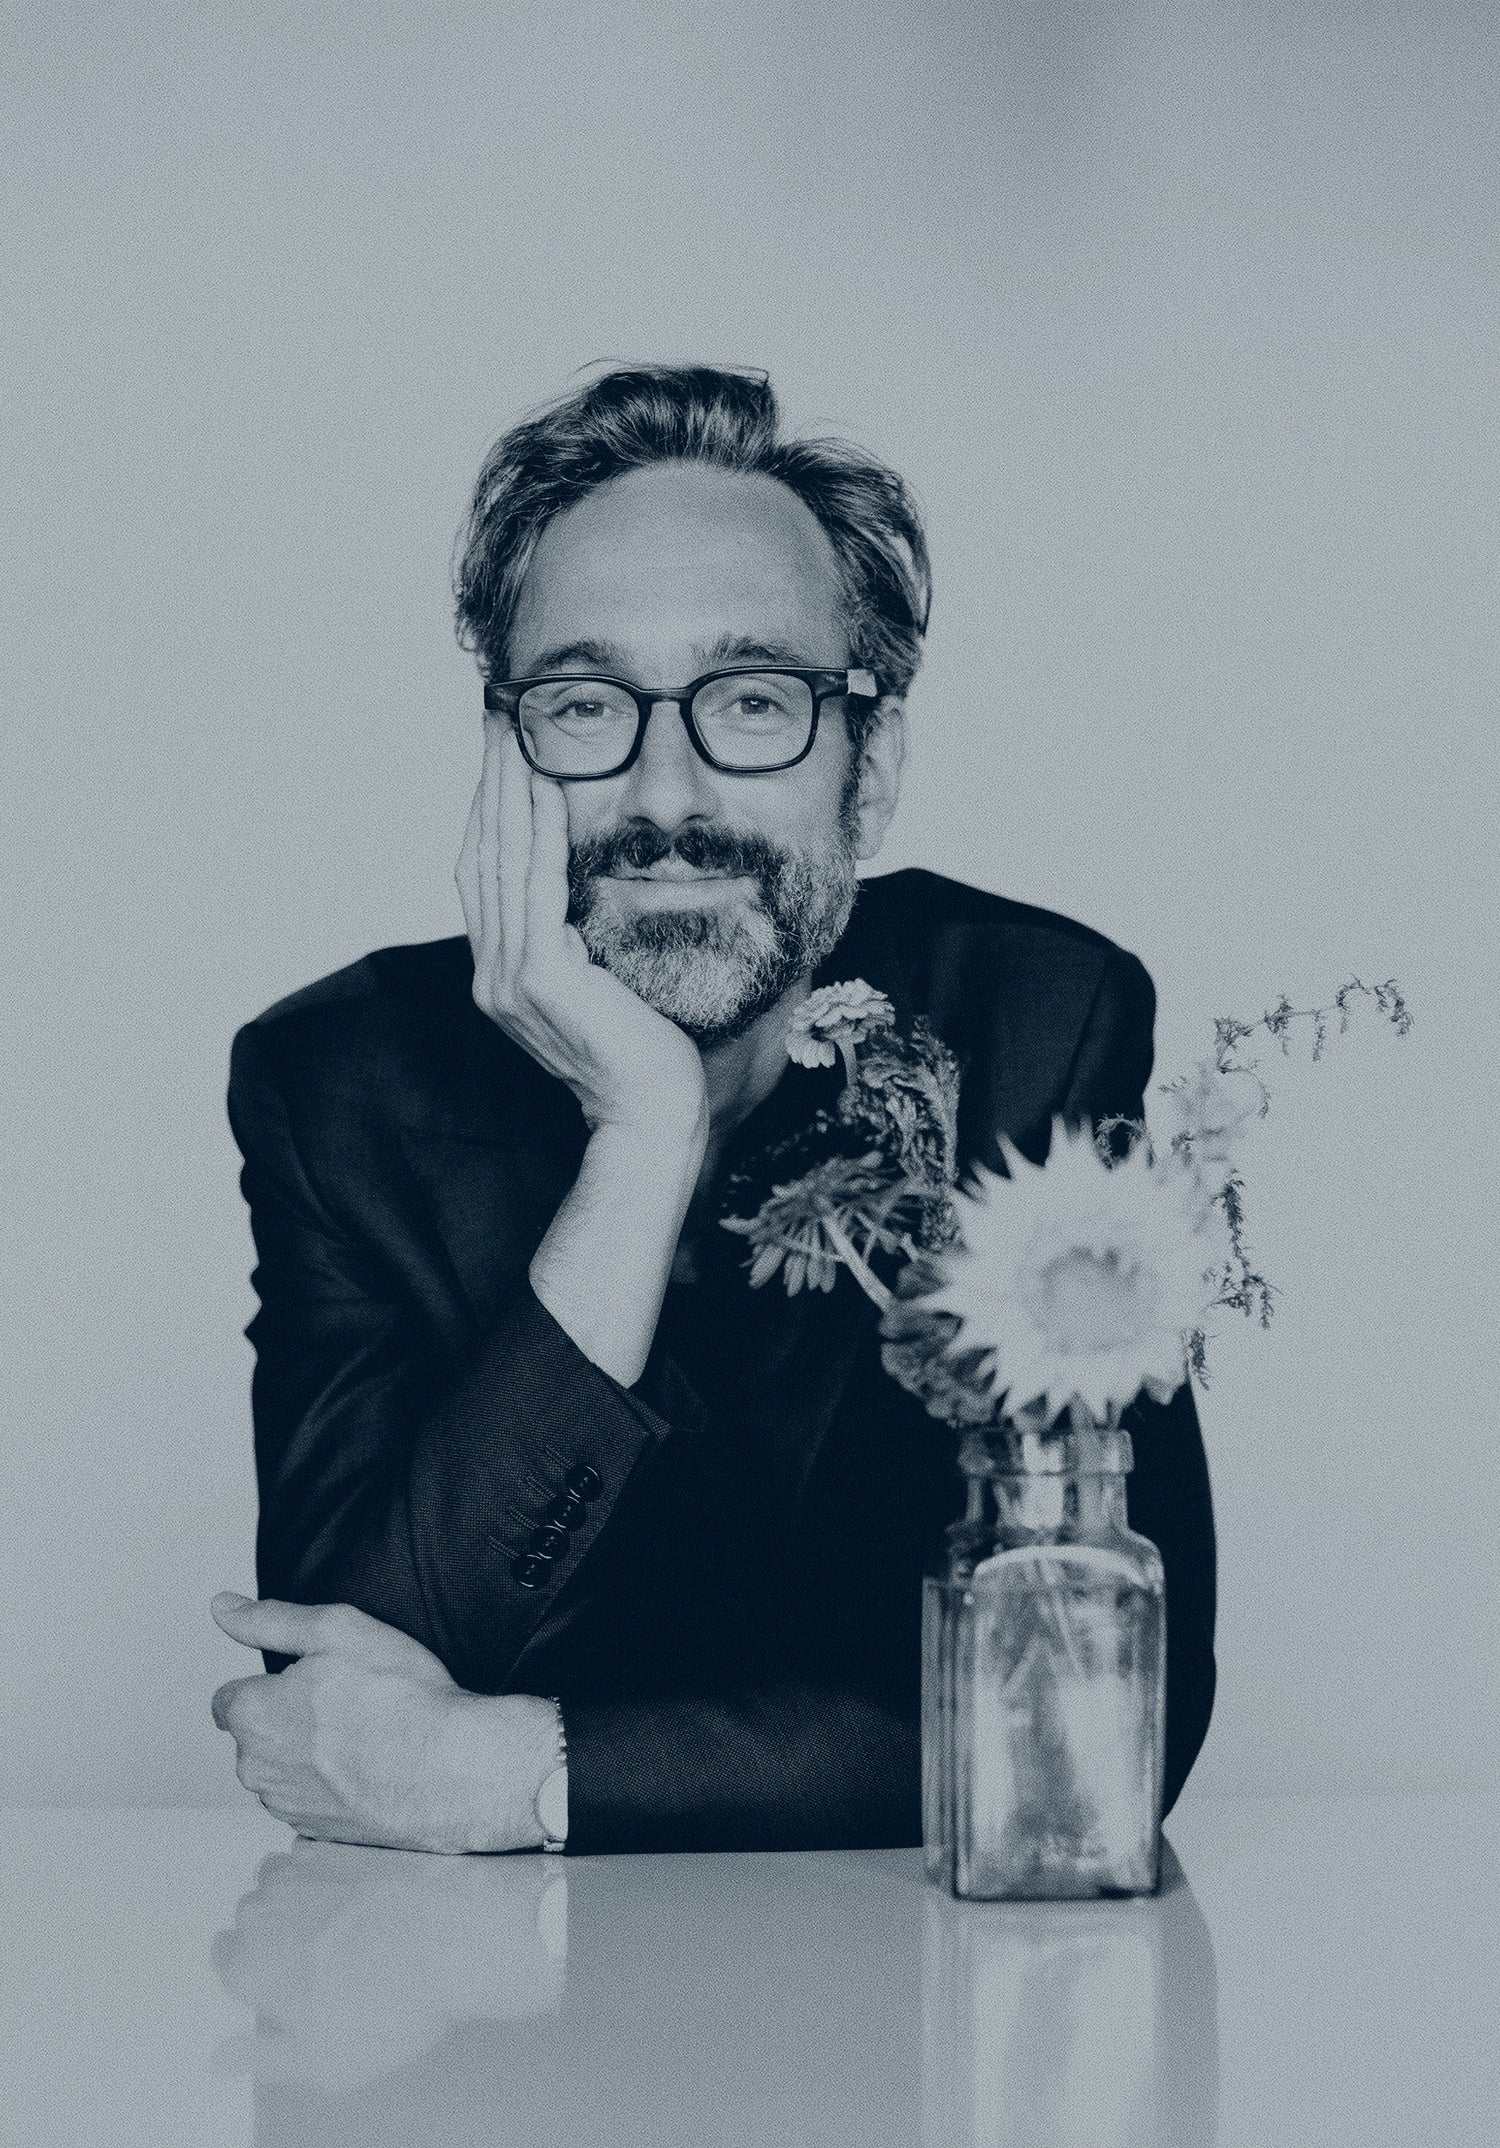 Black and white image of roots artist David Myles leaning on his hand at a white shiny table with wildflowers in a vase next to him